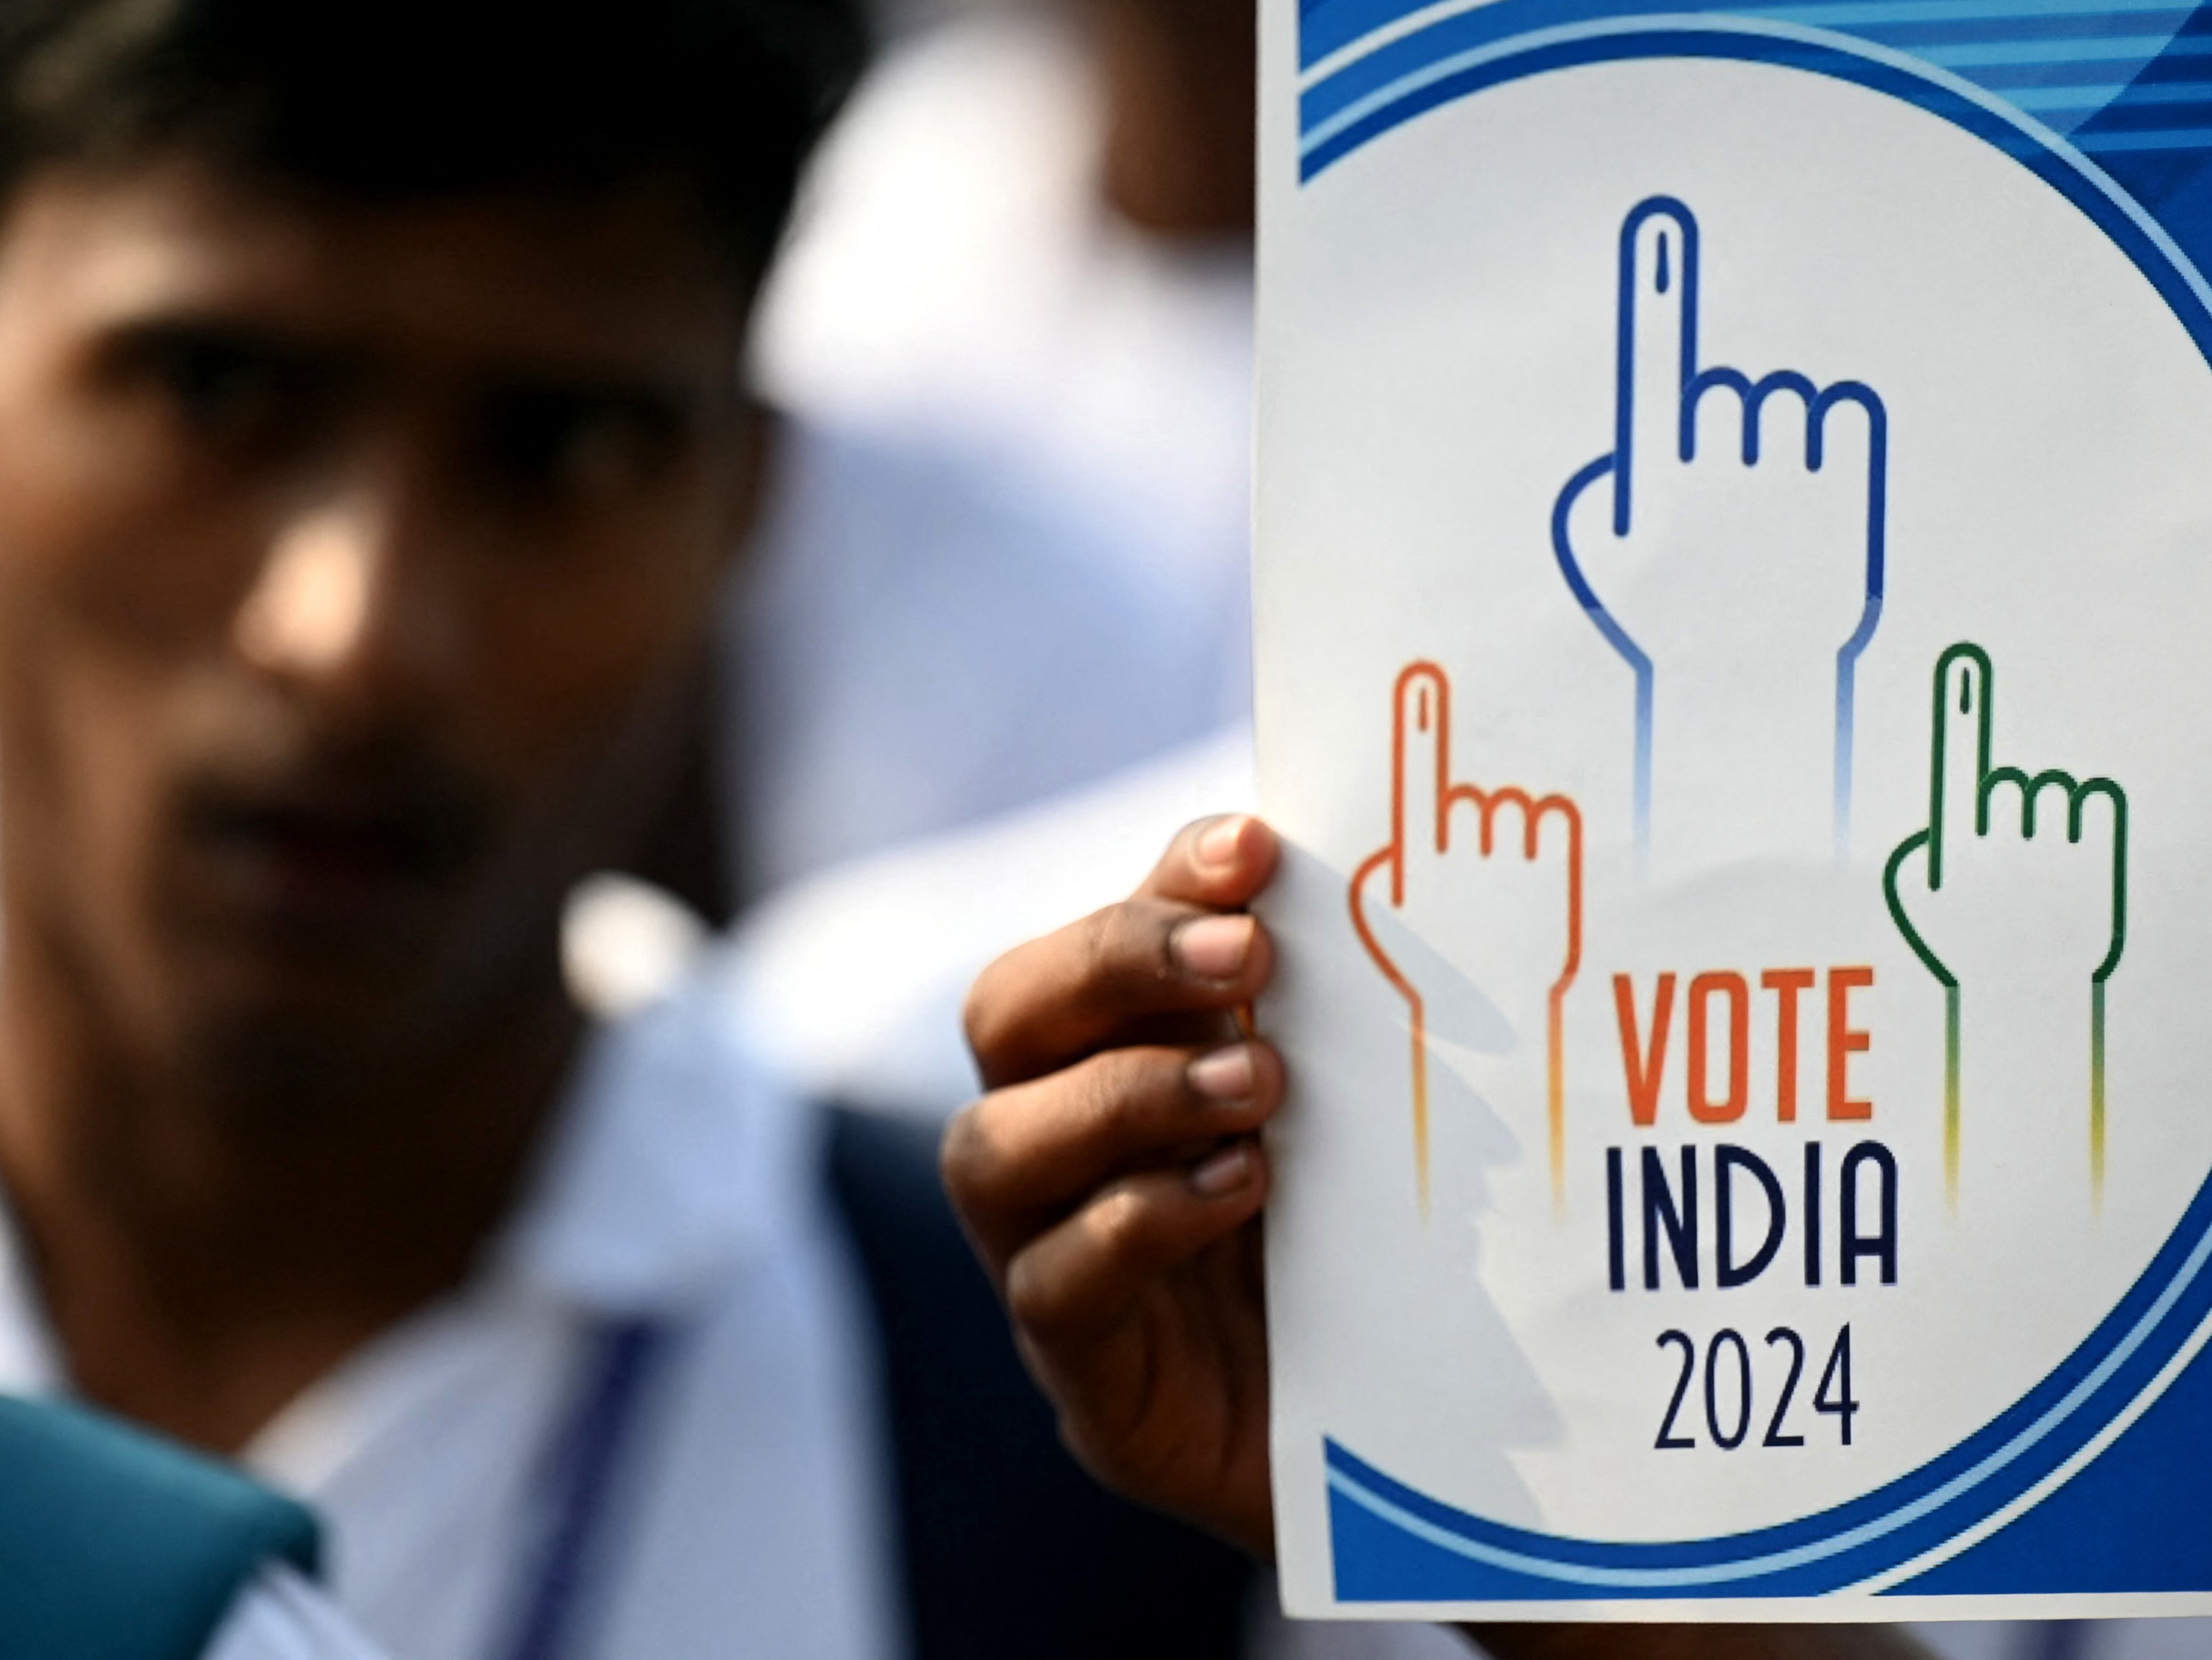 Students participate in a rally to create awareness about the importance of voting ahead of India’s national elections, in Chennai, on 9 March 2024